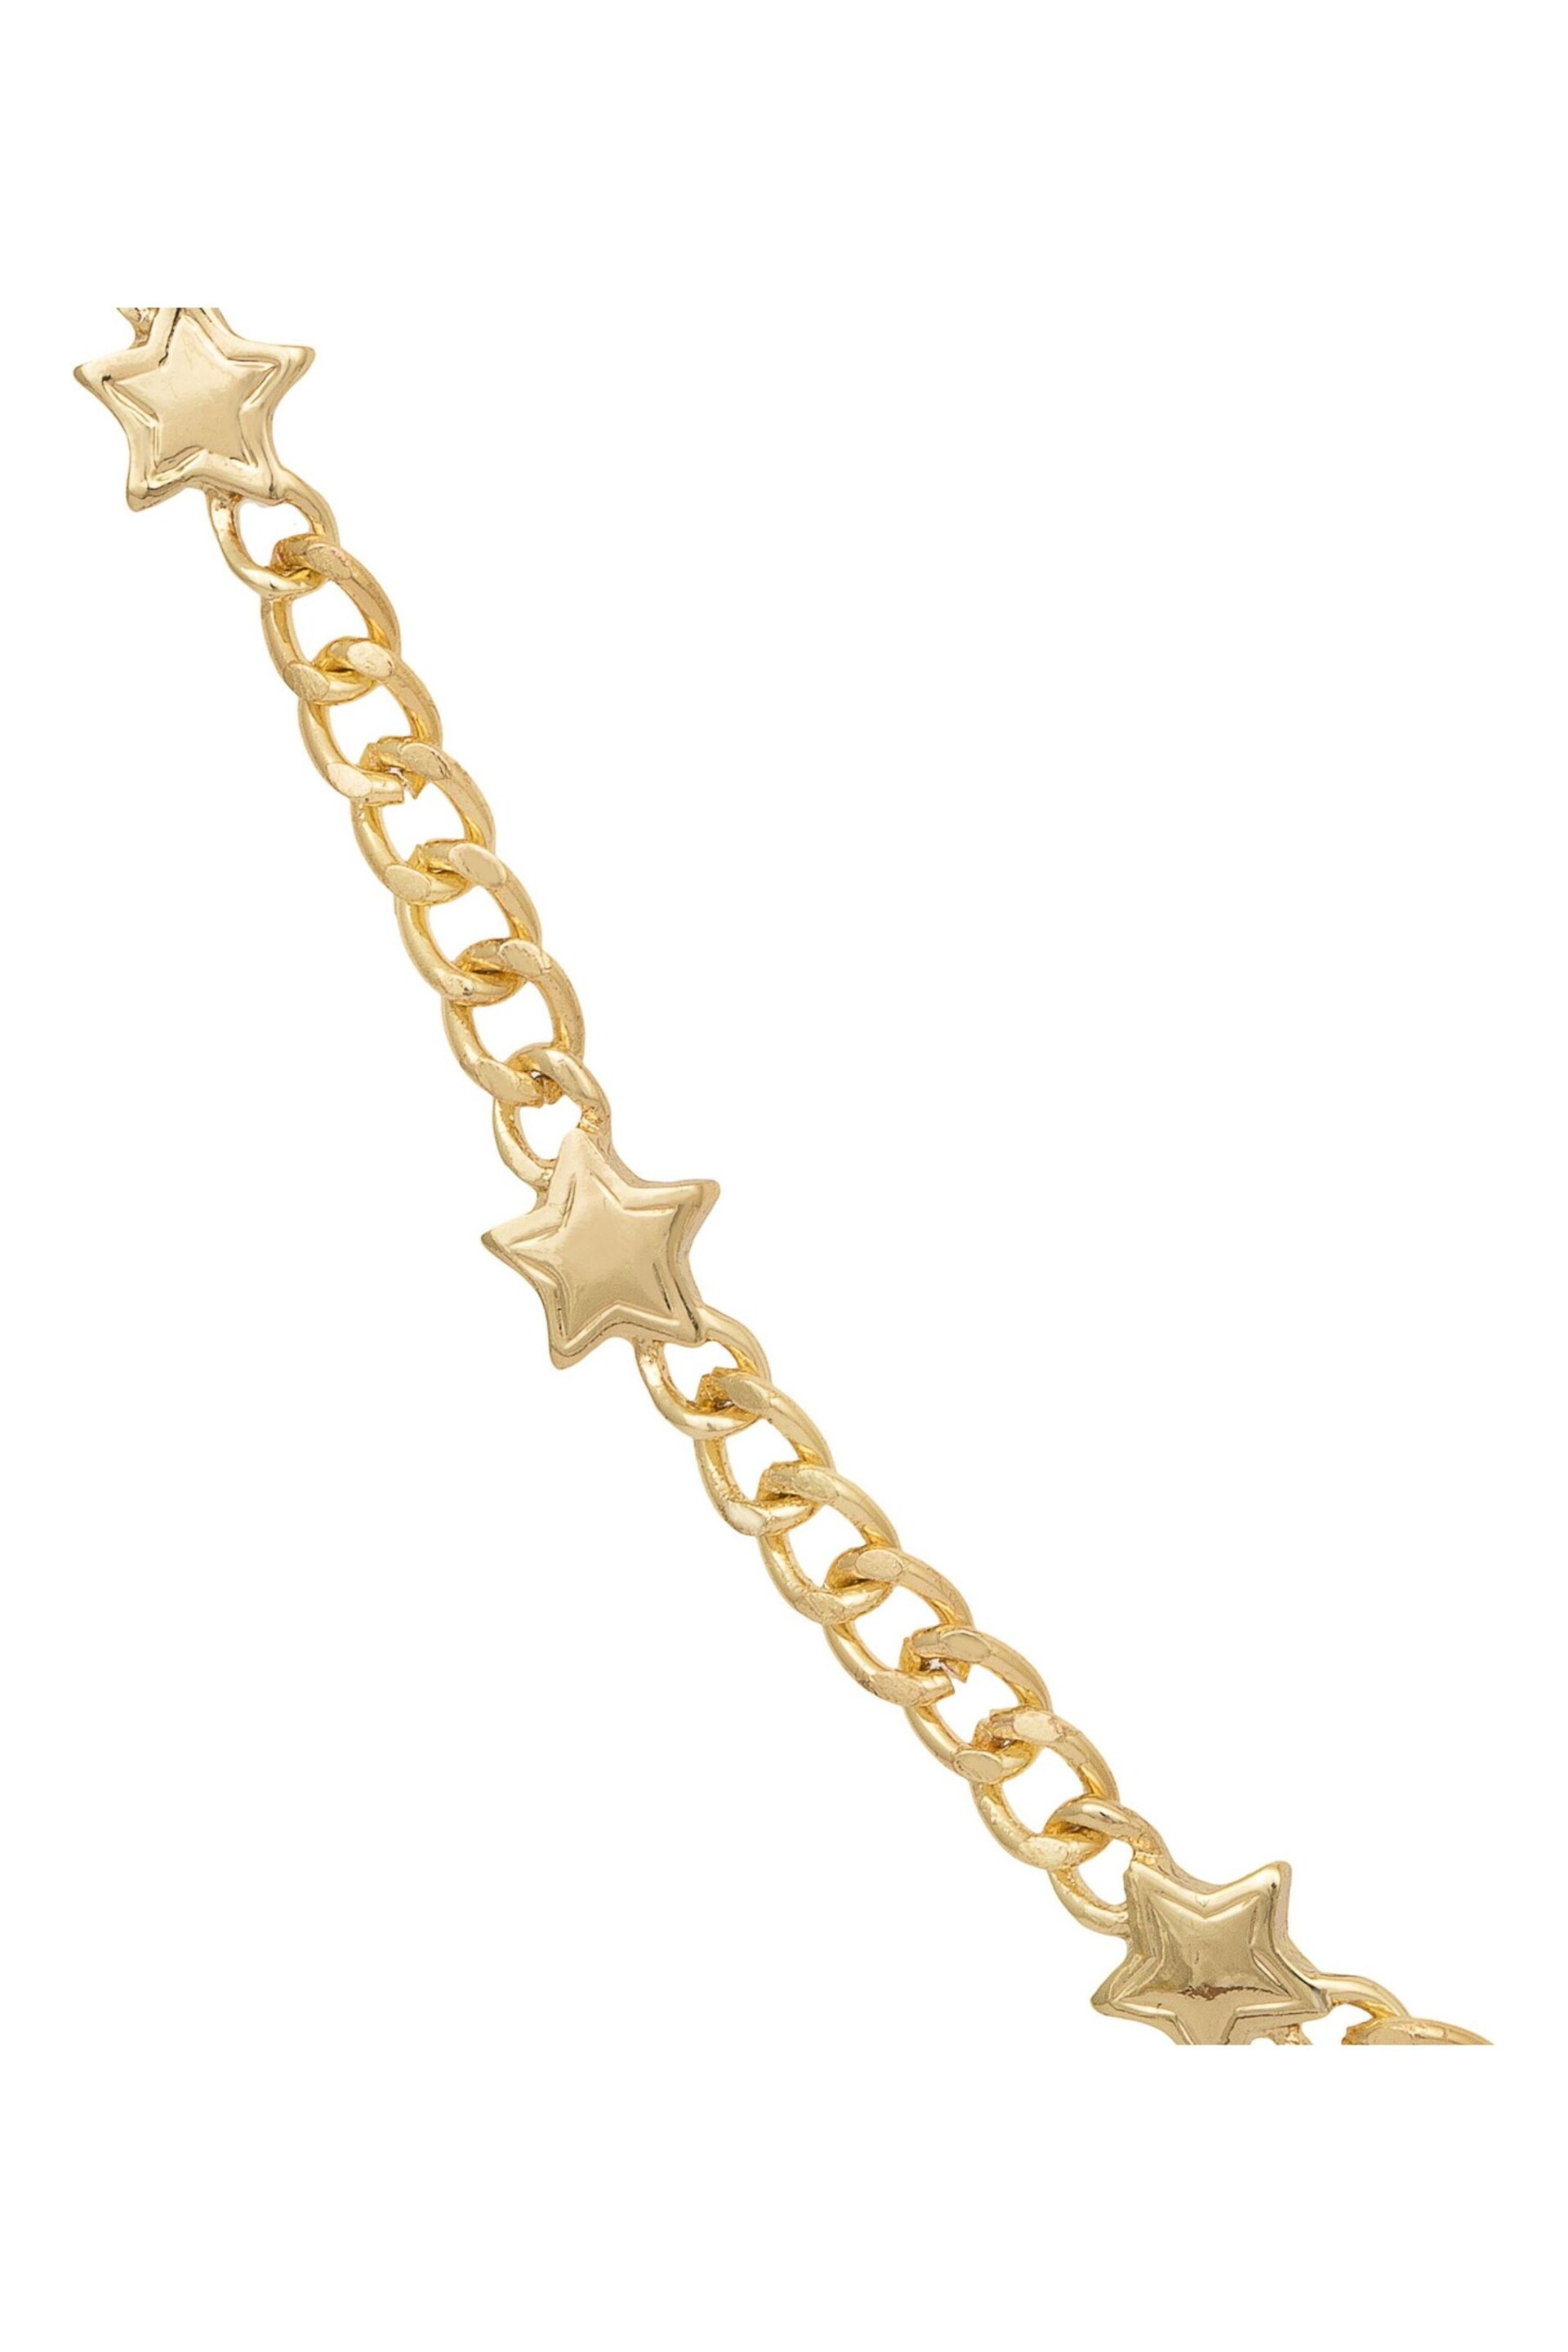 Caramel Jewellery London Gold Tone 'Starburst' Chunky Chain Necklace - Image 2 of 7